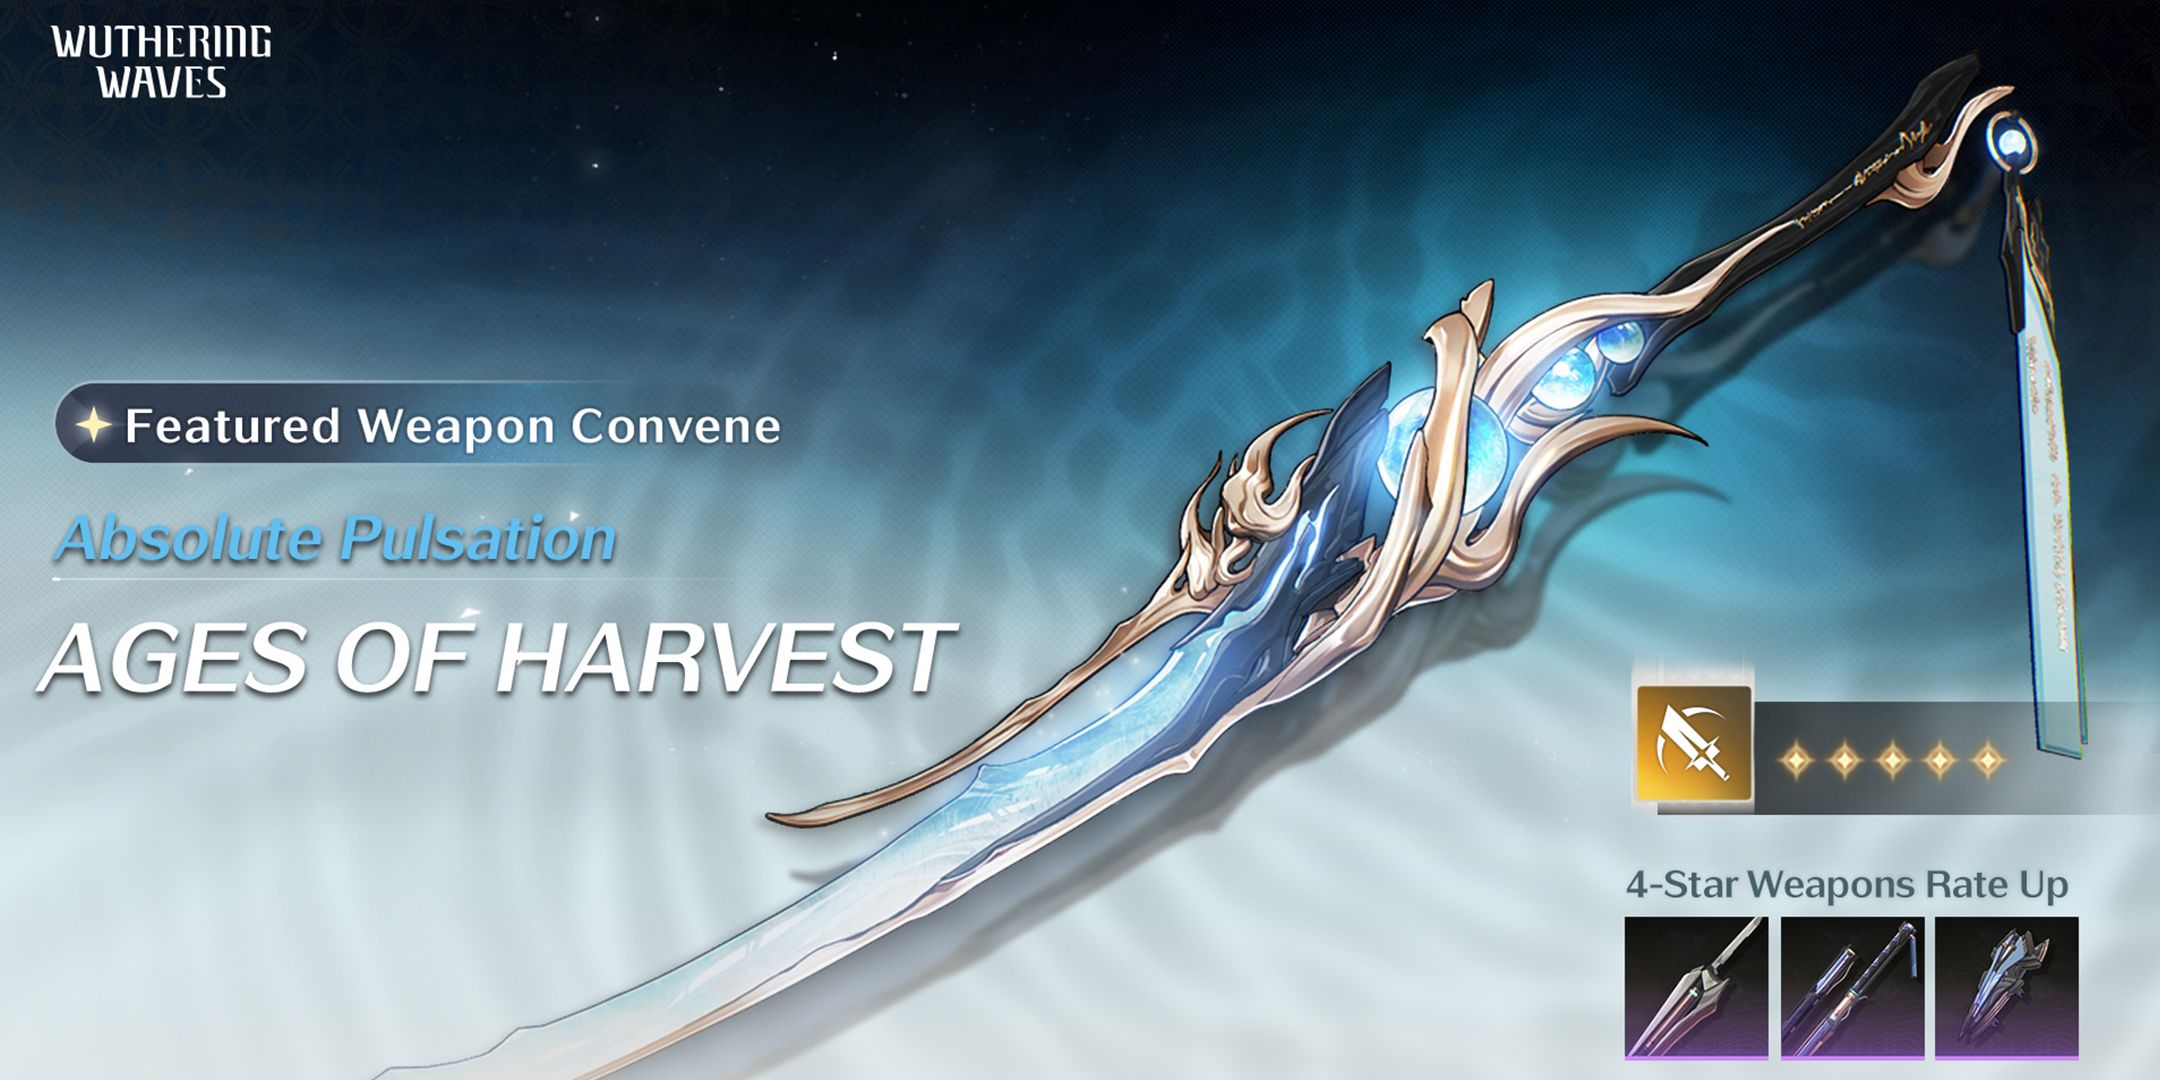 1.1 jinhsi weapon - wuthering waves banner current next past history